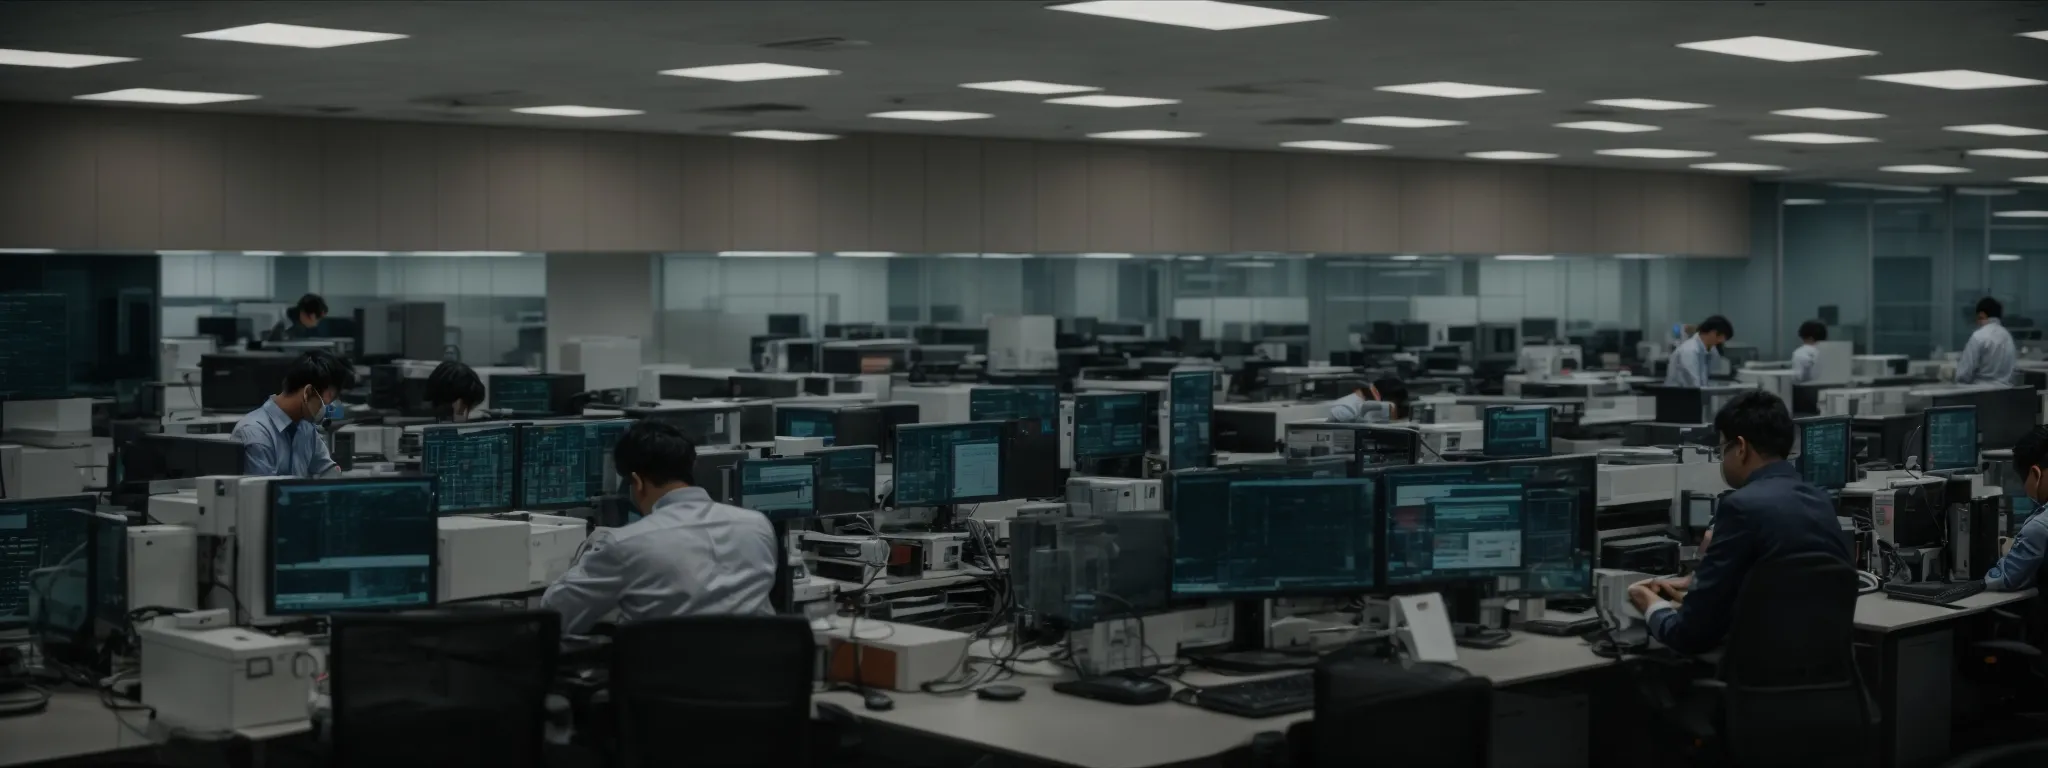 a busy it department with employees working on servers and computers to implement new software updates.